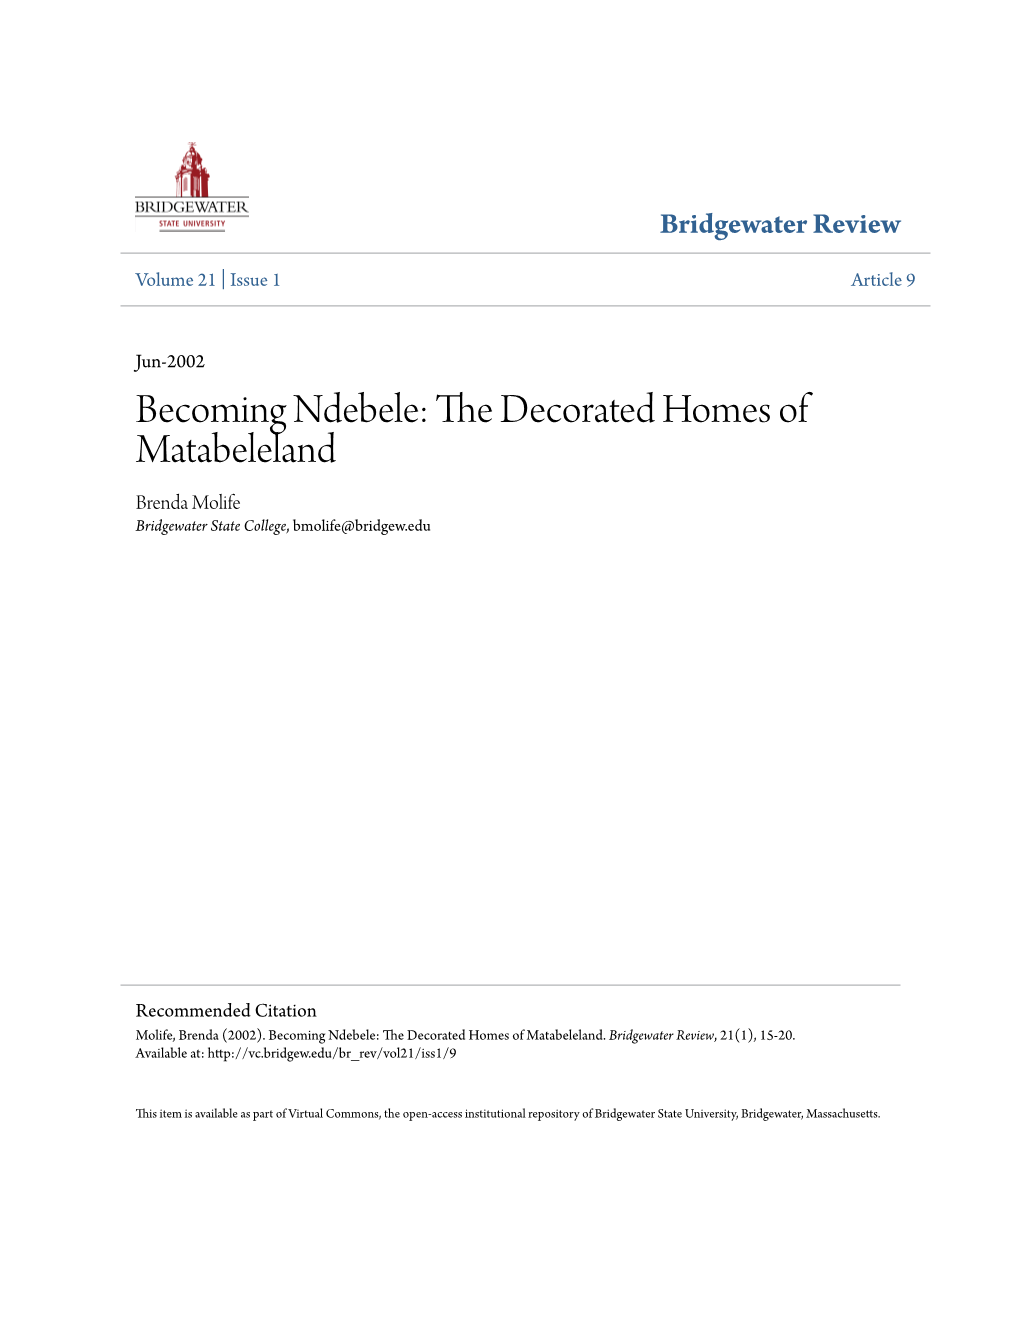 Becoming Ndebele: the Decorated Homes of Matabeleland